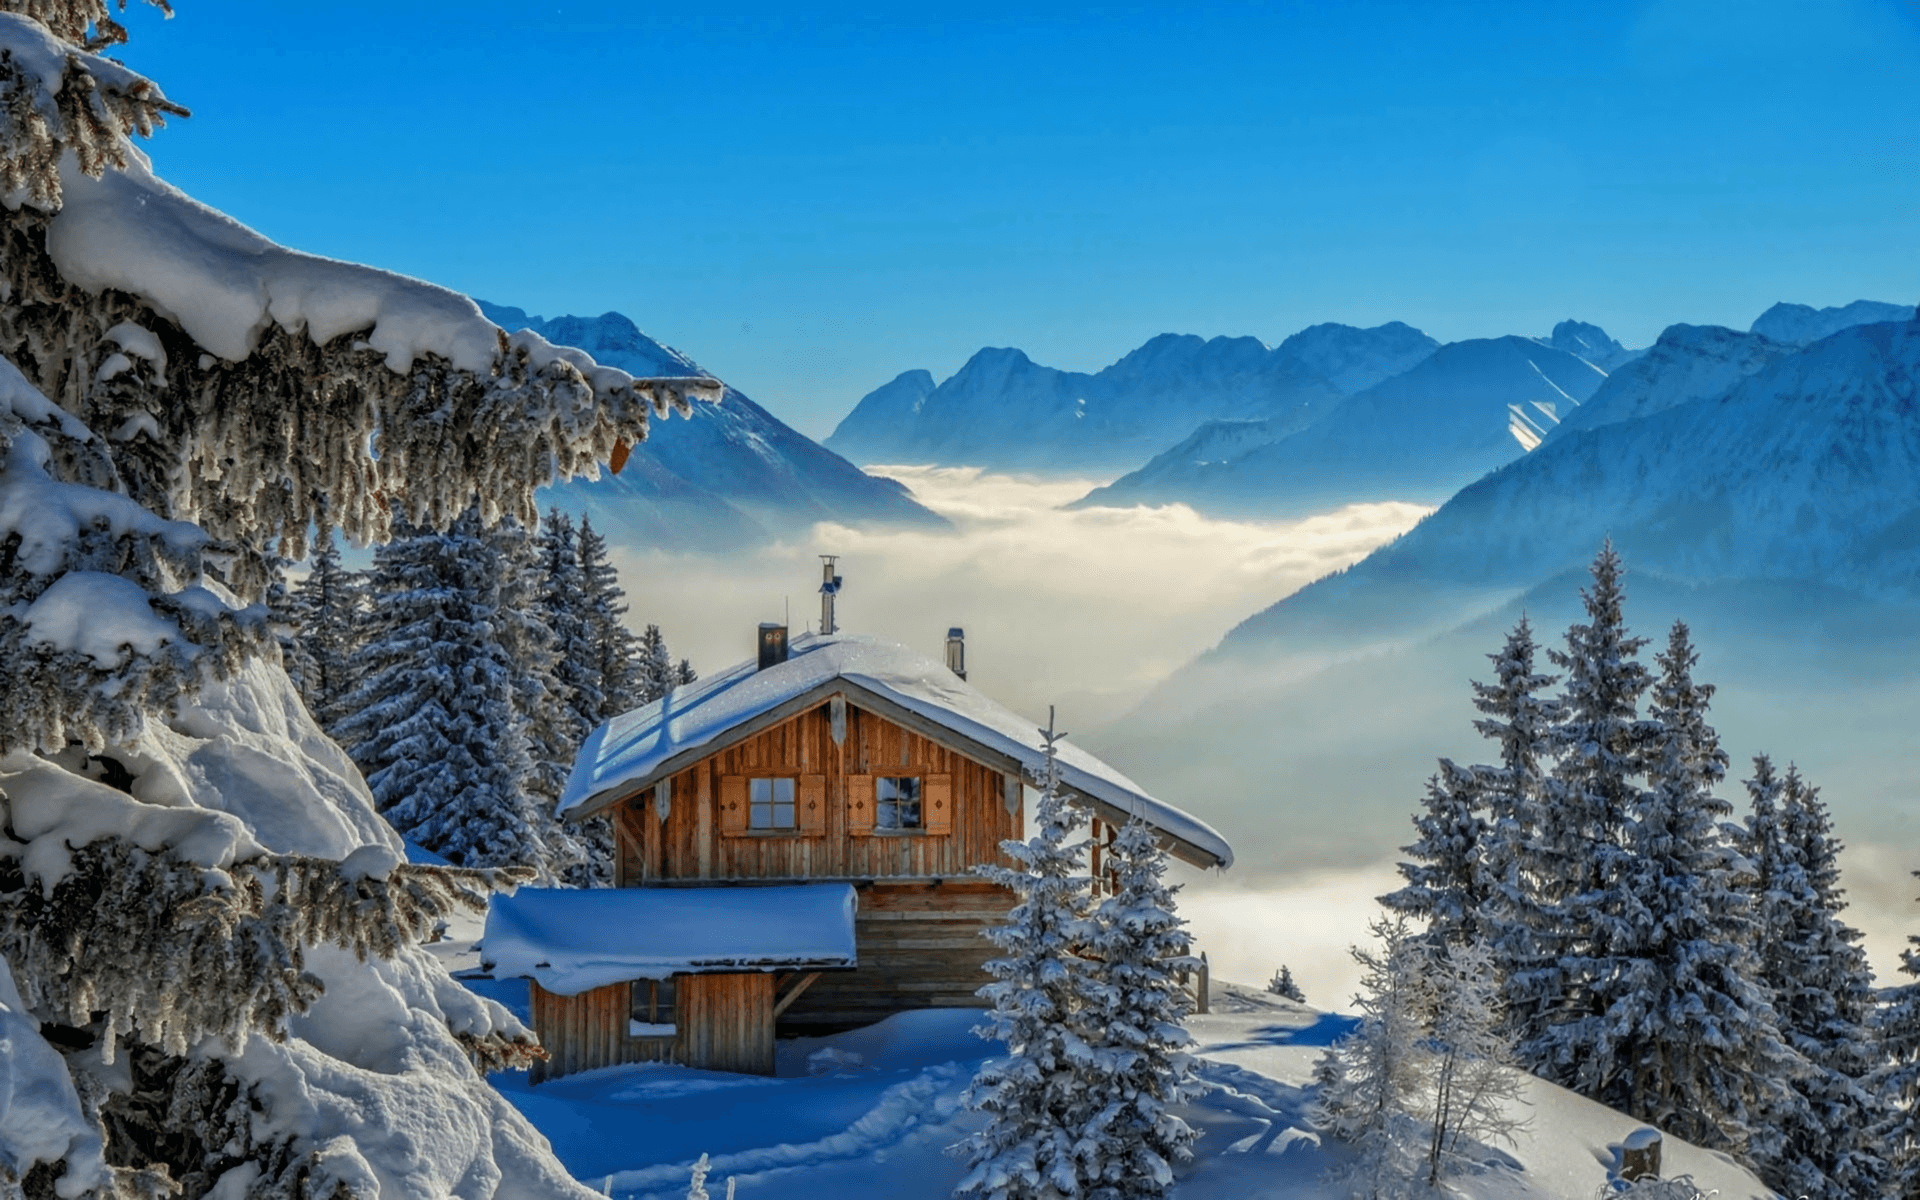 Cabin in the Winter Mountains HD Wallpaper